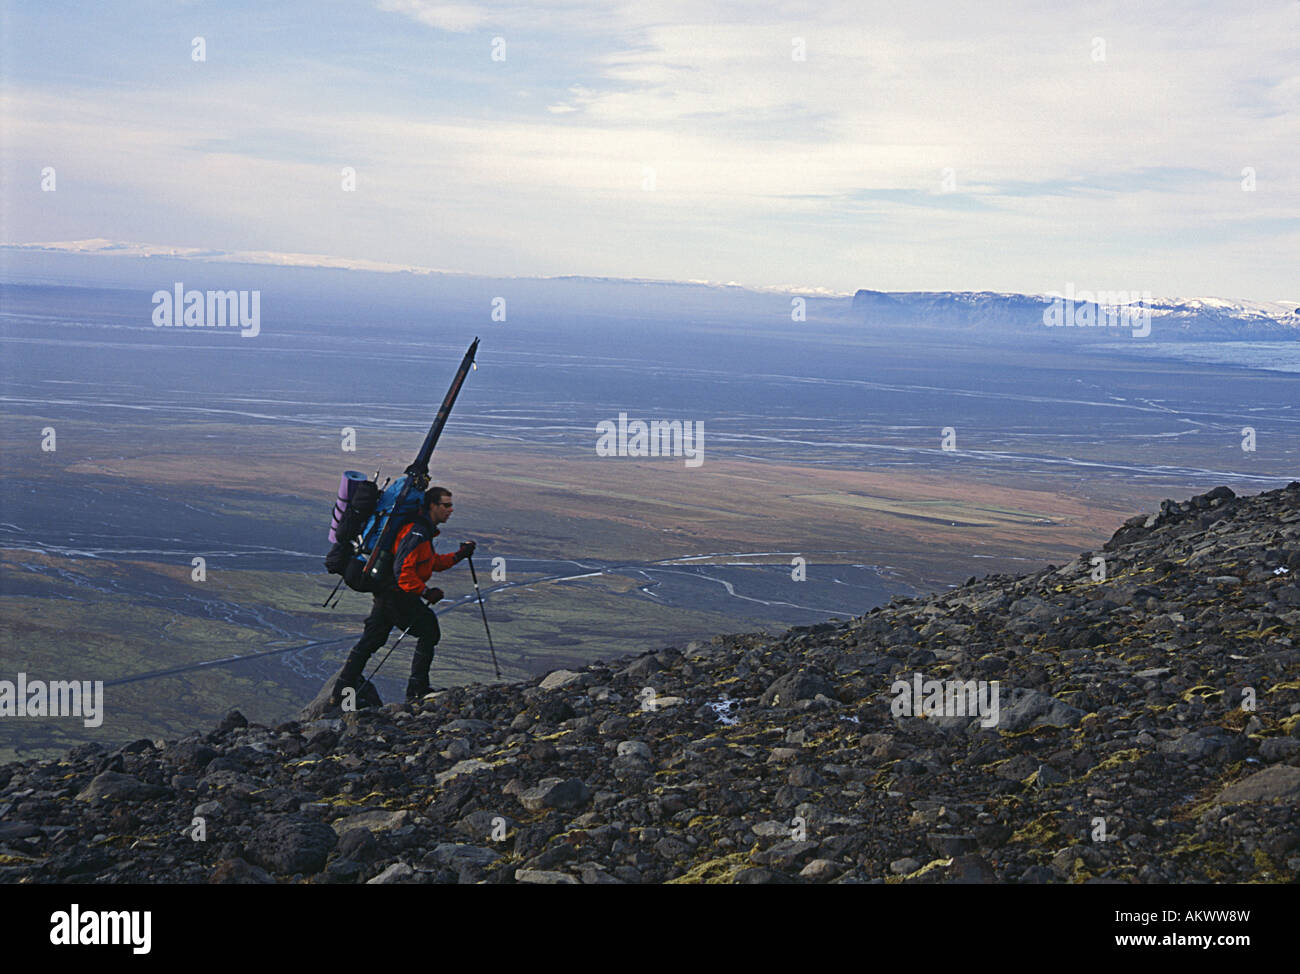 Troy Henkels climbing Mount Hvannadalshnukur which, at 6952 feet (2119 meters), is the highest point in Iceland. Stock Photo